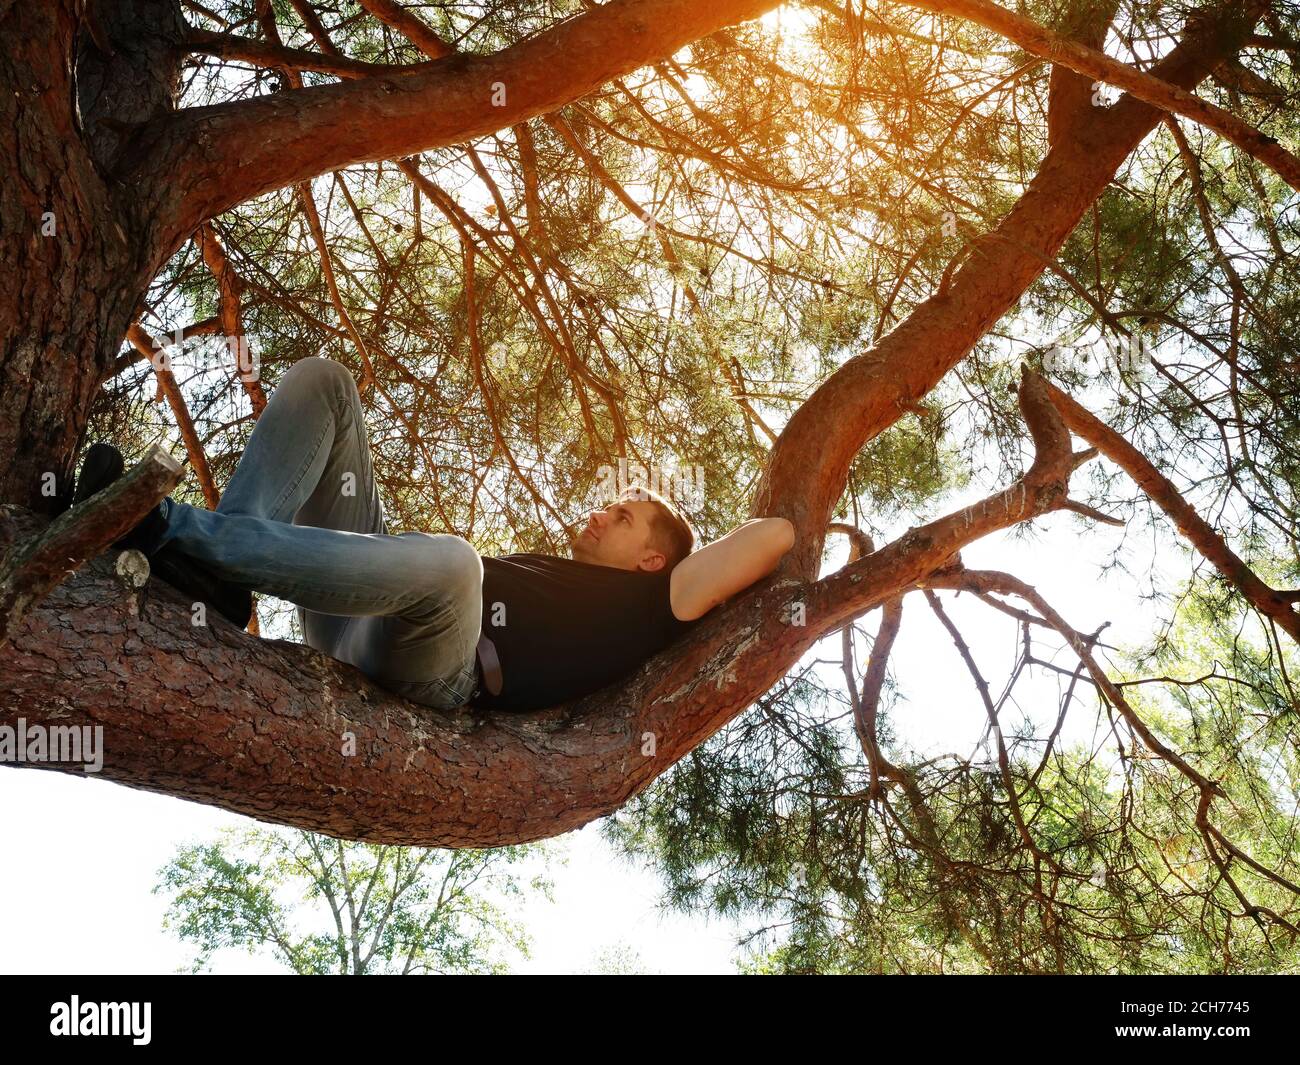 A man is resting lying on a branch in a summer forest. Stock Photo